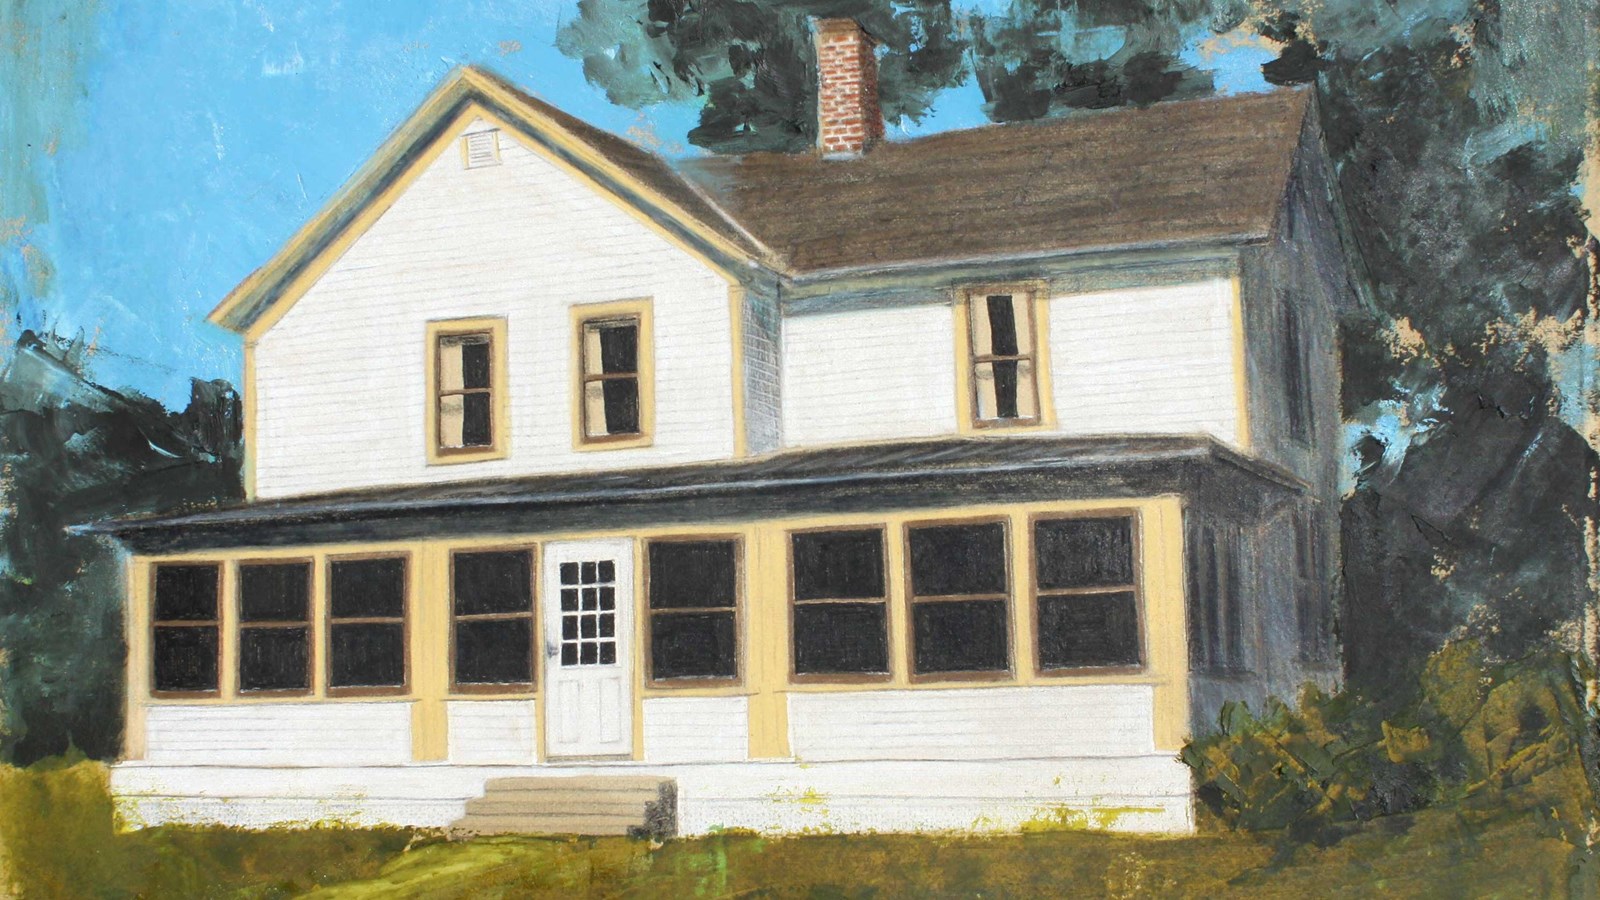 A cream colored two story house with a broad enclosed porch and yellow trim, depicted in a painting.